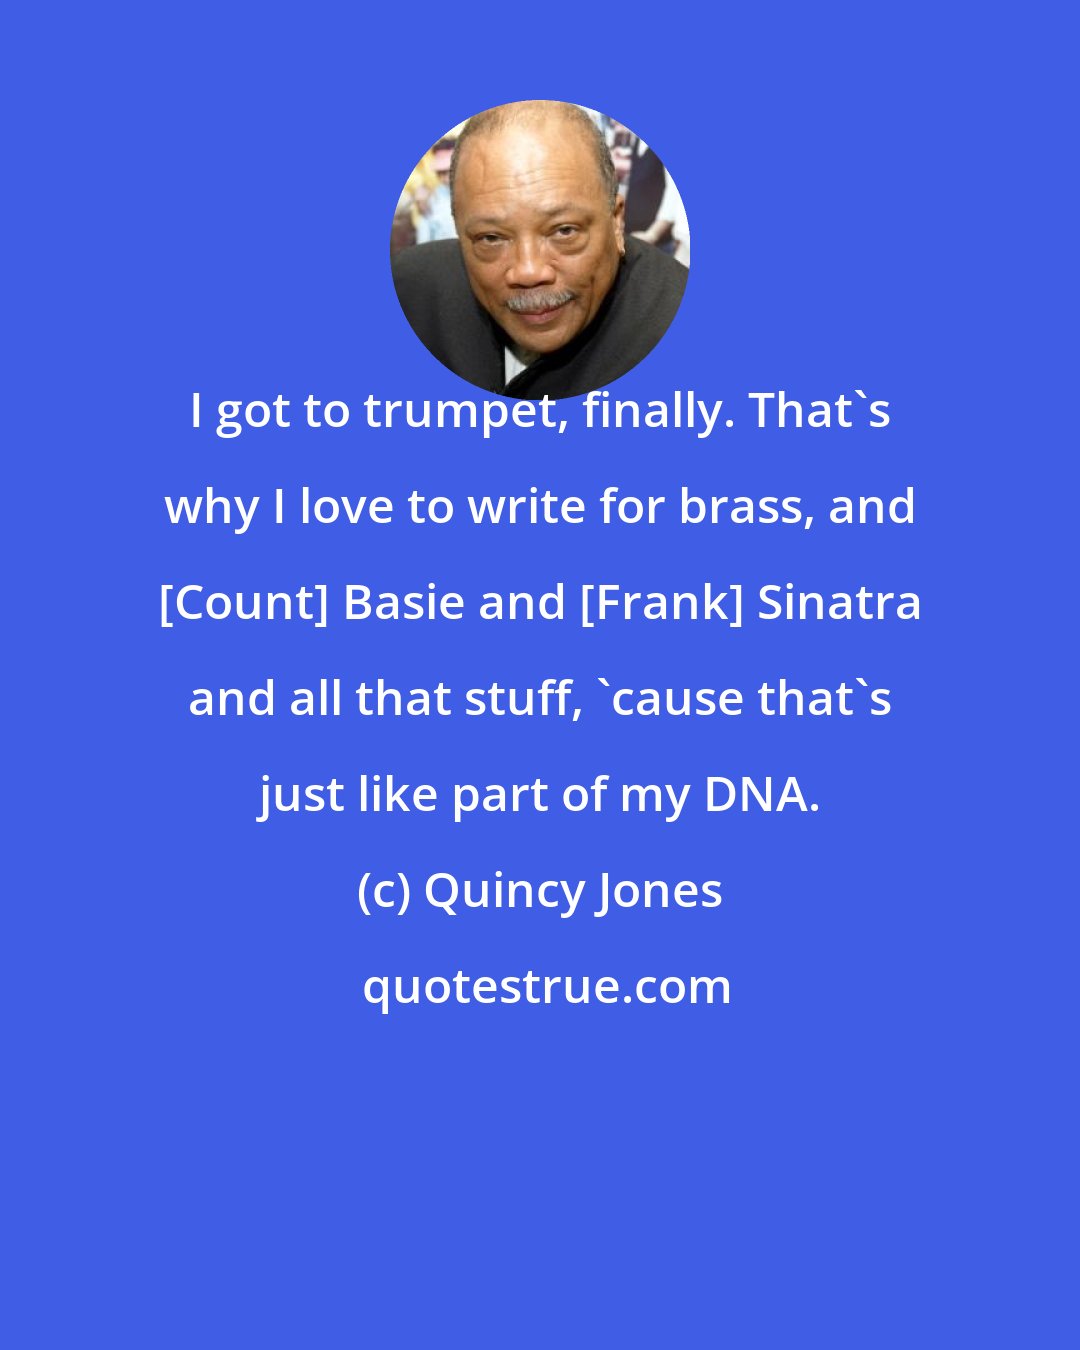 Quincy Jones: I got to trumpet, finally. That's why I love to write for brass, and [Count] Basie and [Frank] Sinatra and all that stuff, 'cause that's just like part of my DNA.